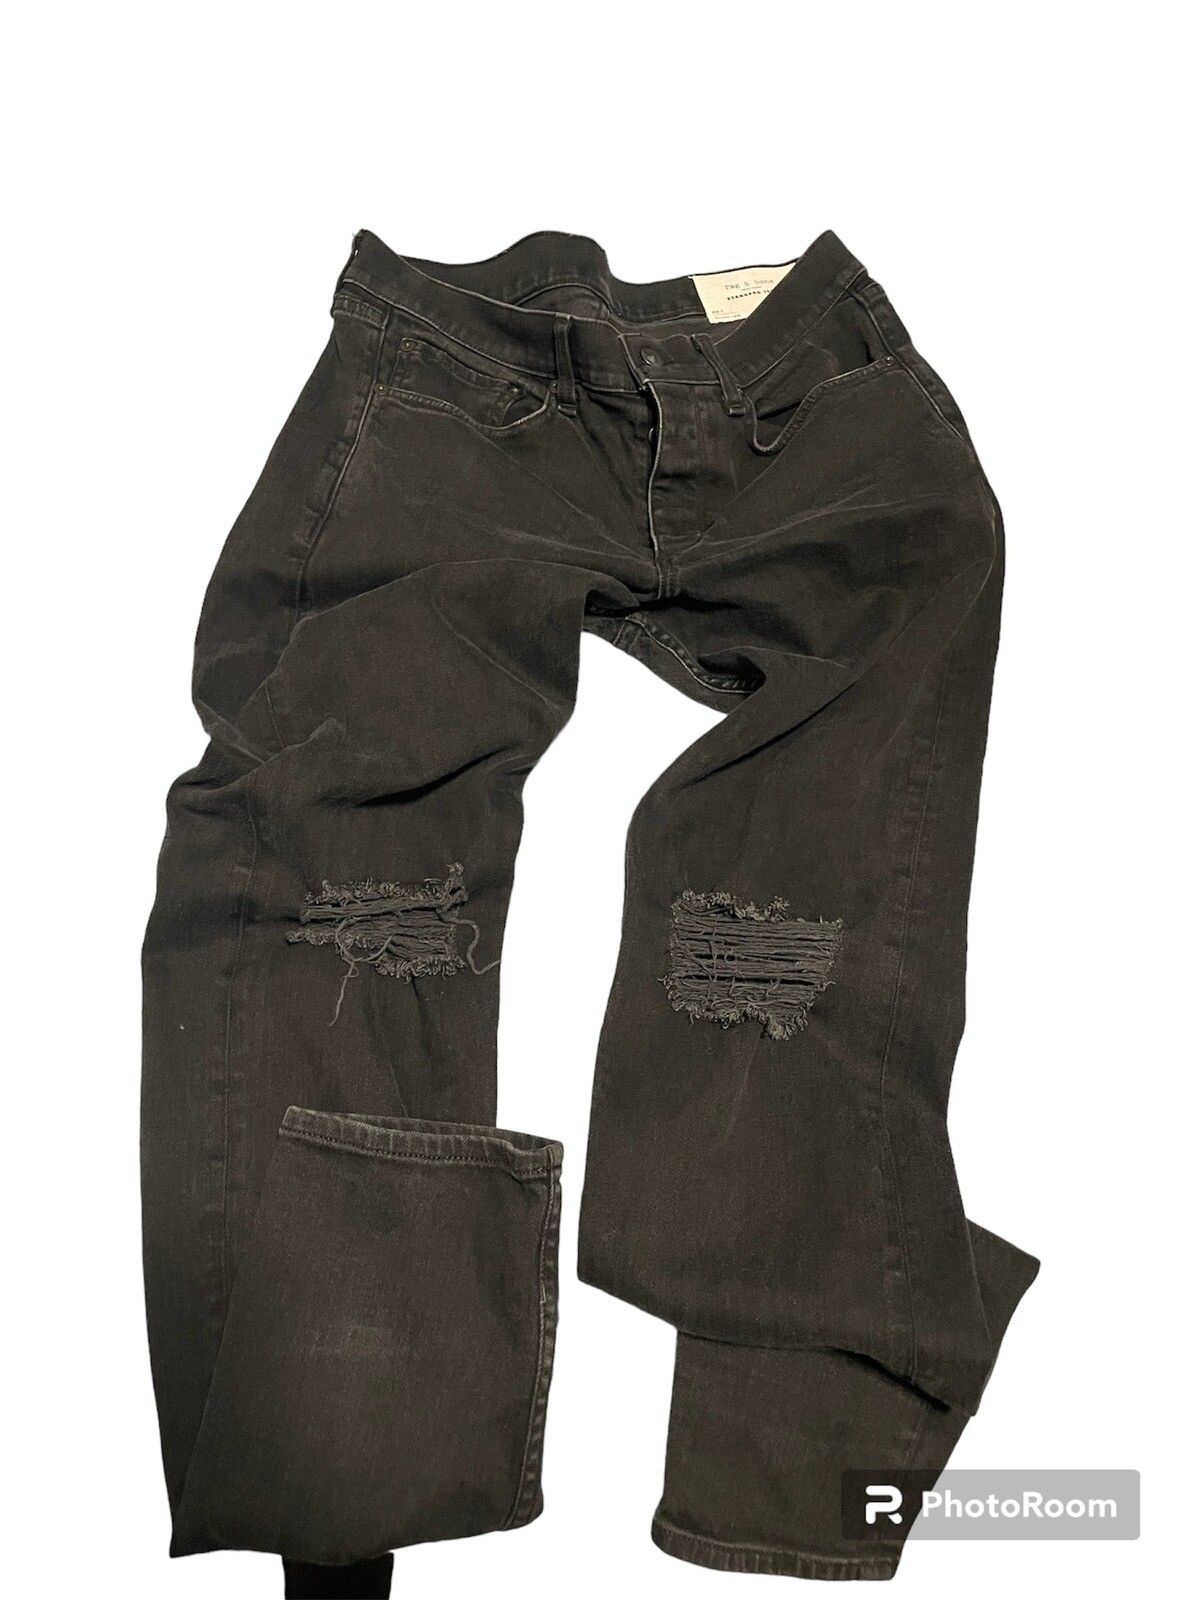 Rag & Bone Ray and Bone Black Ripped Skinny Fit Jeans Size US 34 / EU 50 - 1 Preview